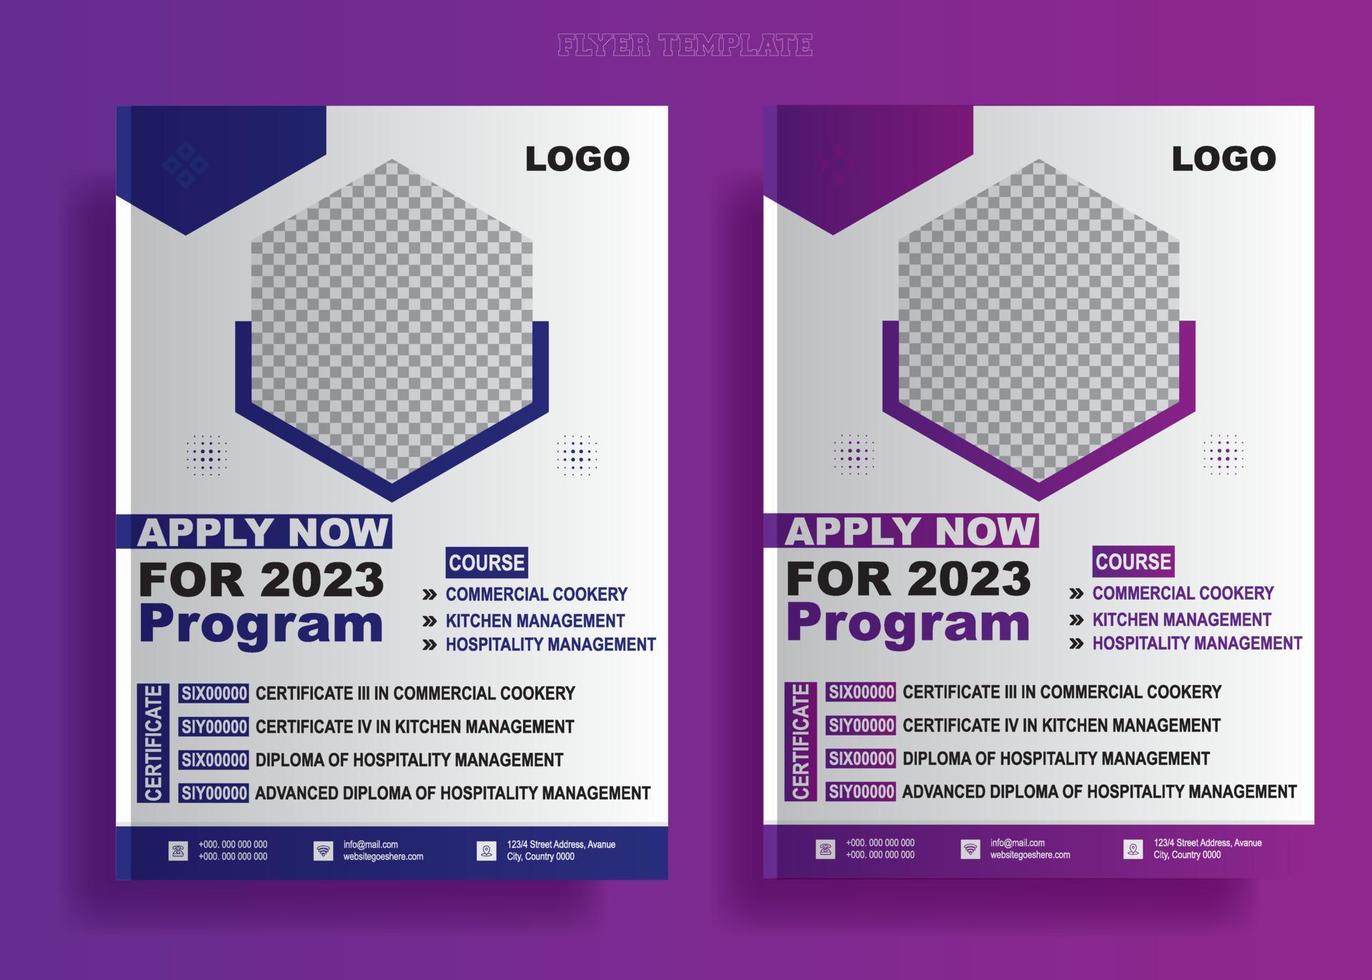 Flyer design for the program application template, invitation cards for marketing promotion, crouse in a  certificate is given program, Corporate leaflet advertisements for the invitation. Modern post vector